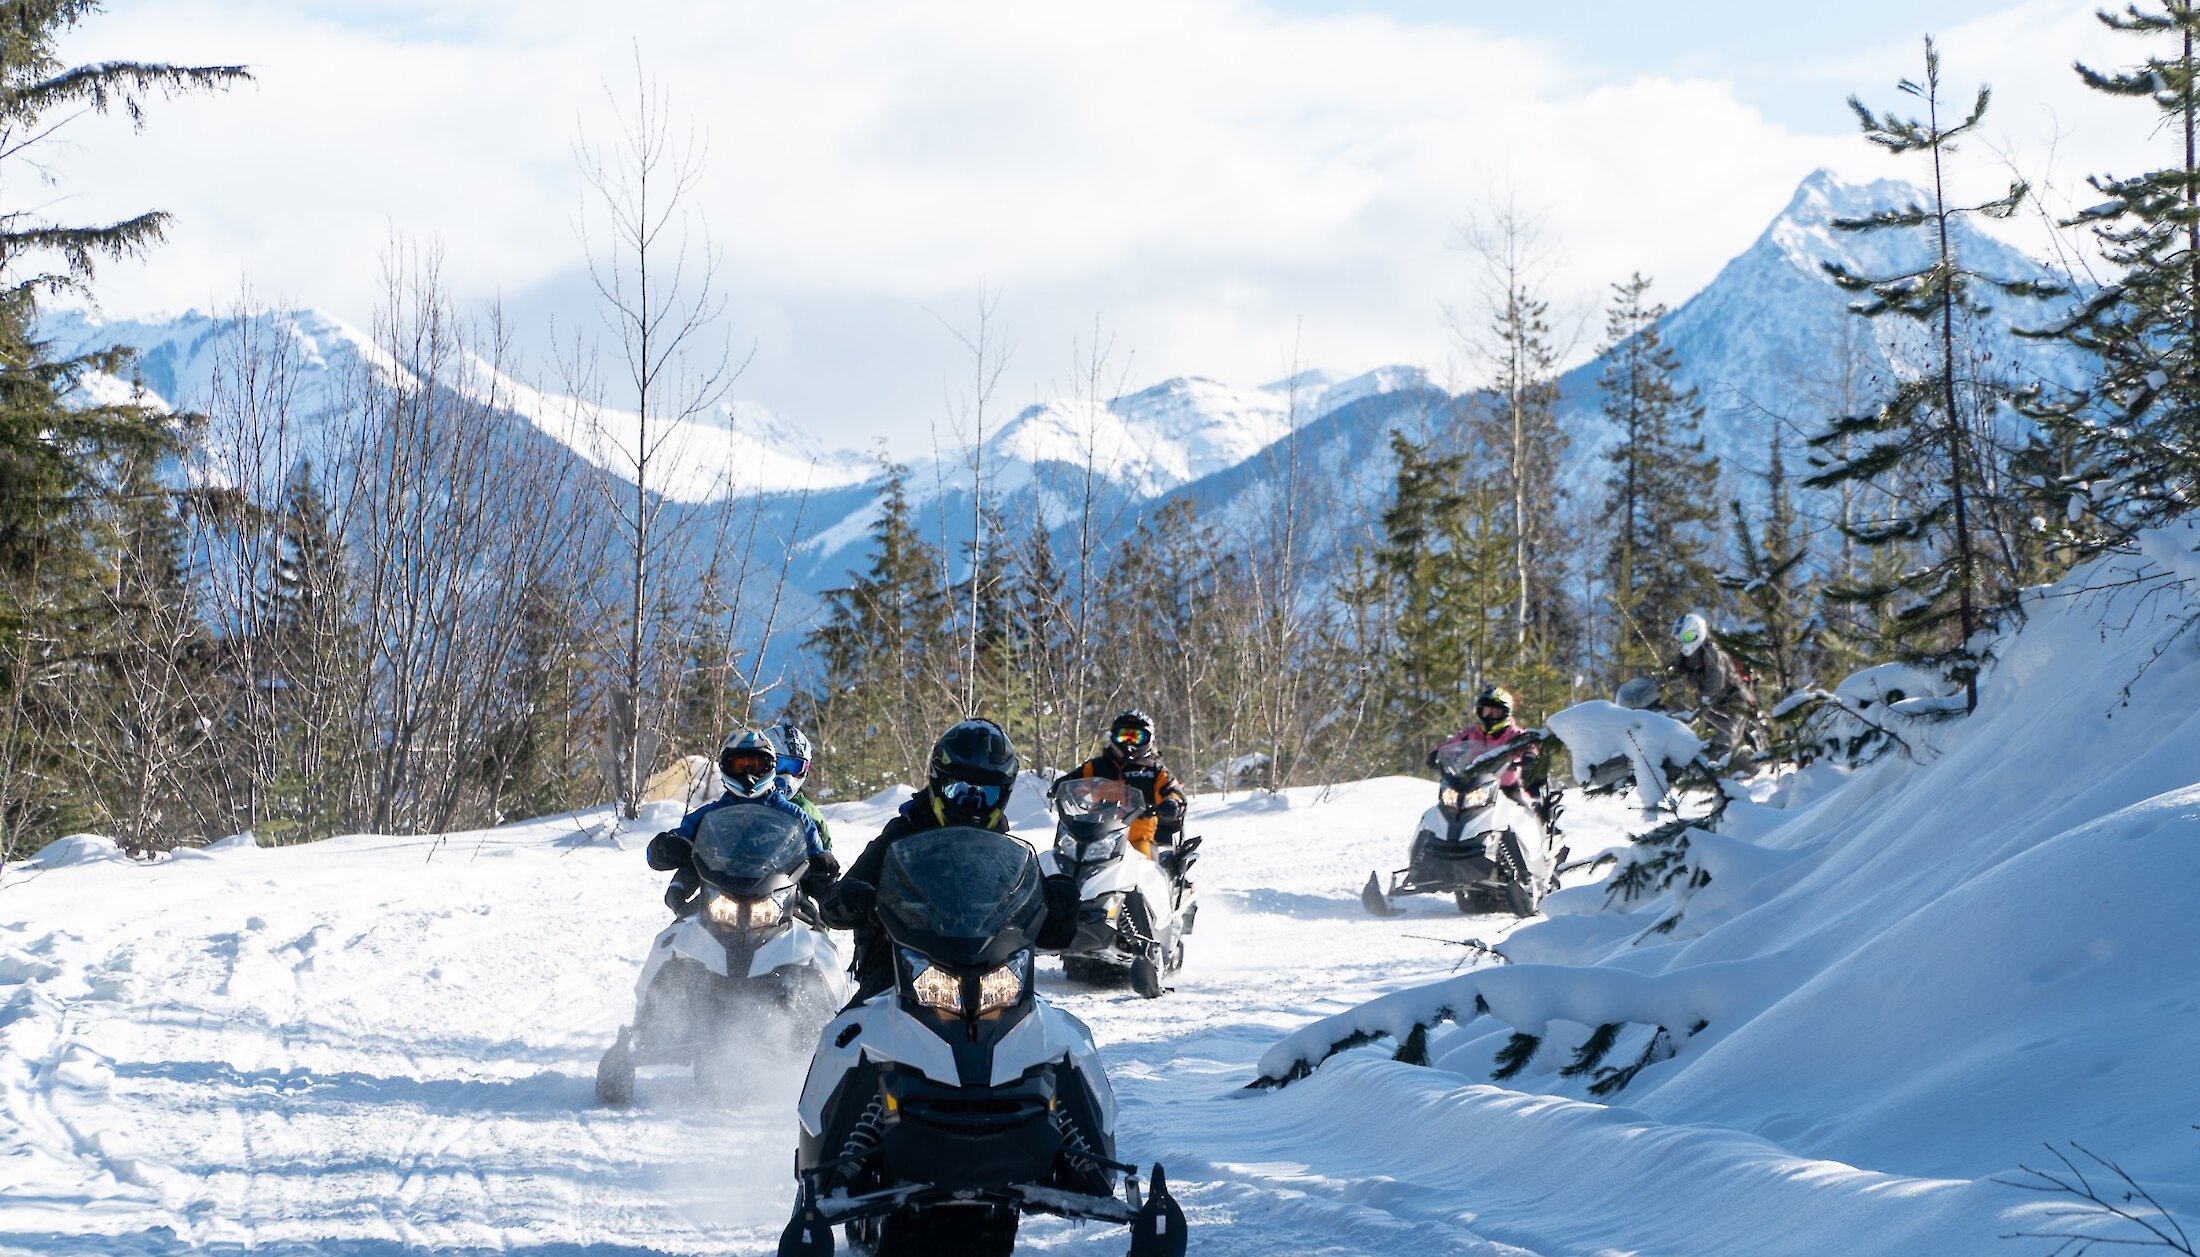 Snowmobilers following the mountain trail in Kicking Horse